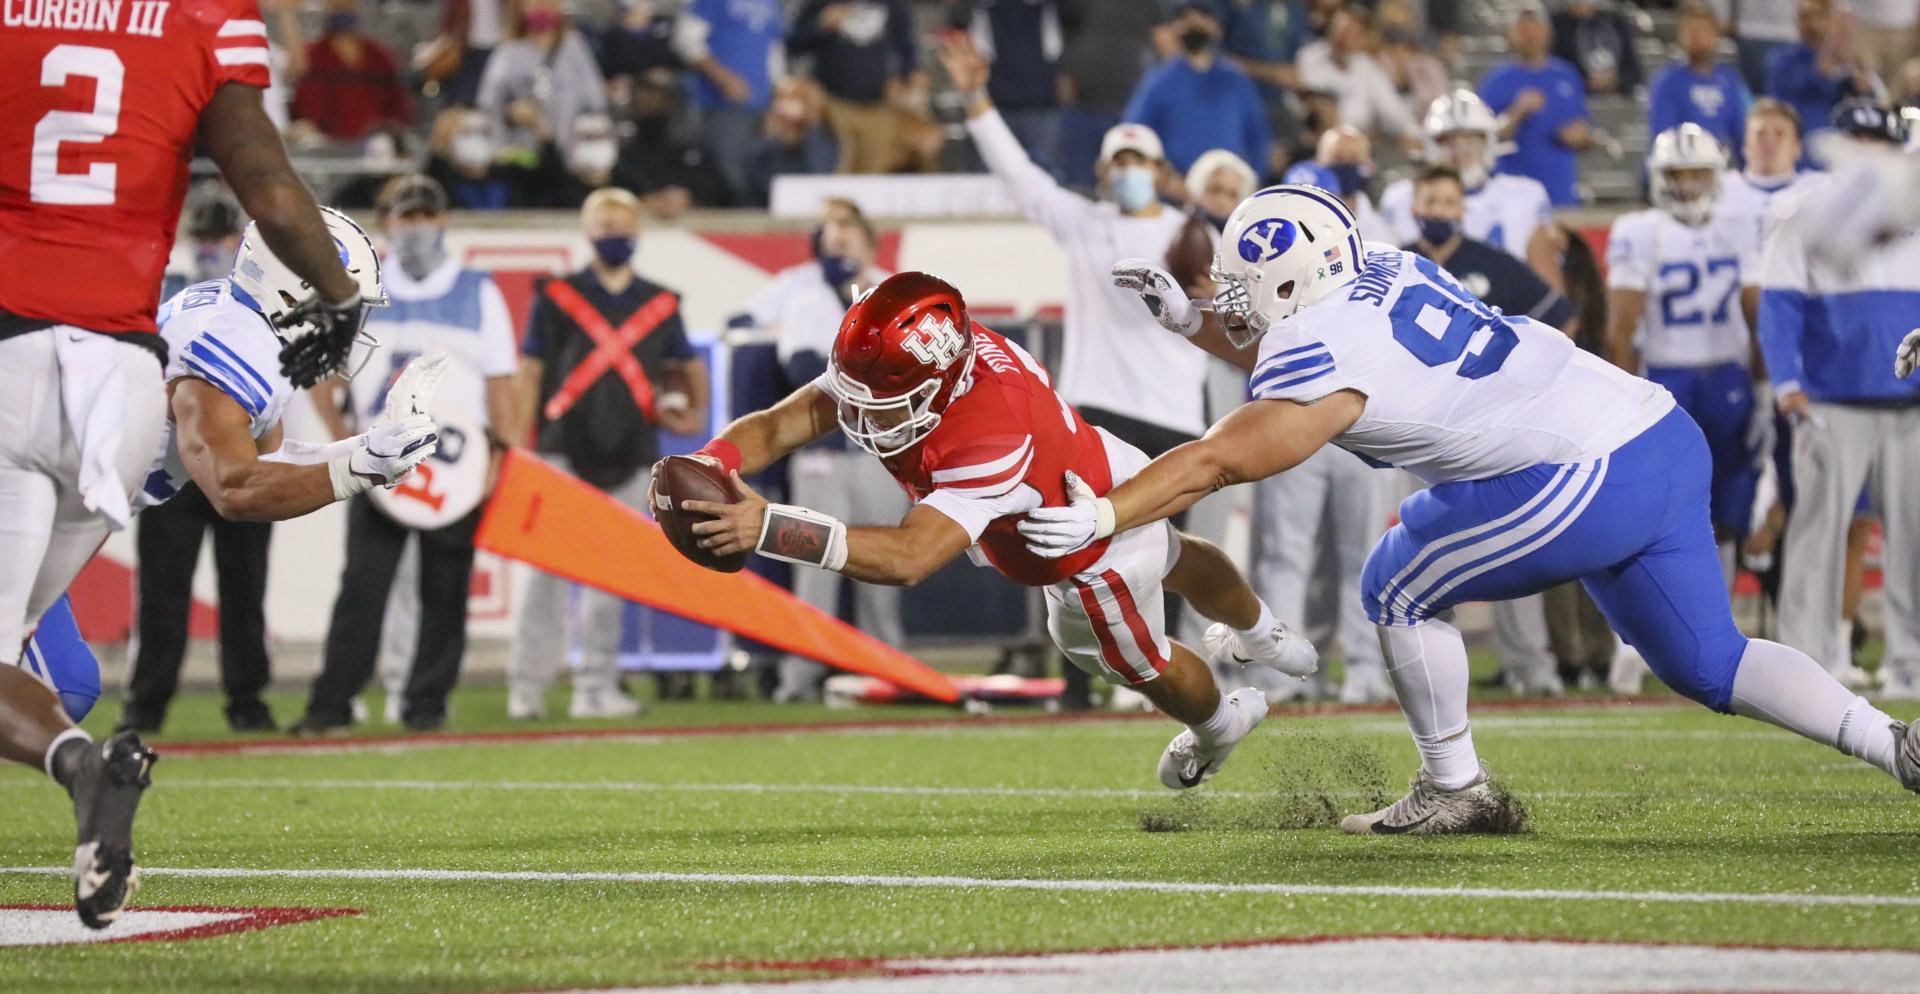 Junior quarterback Clayton Tune dives into the end zone for a 5-yard rushing touchdown against BYU | Courtesy of UH athletics